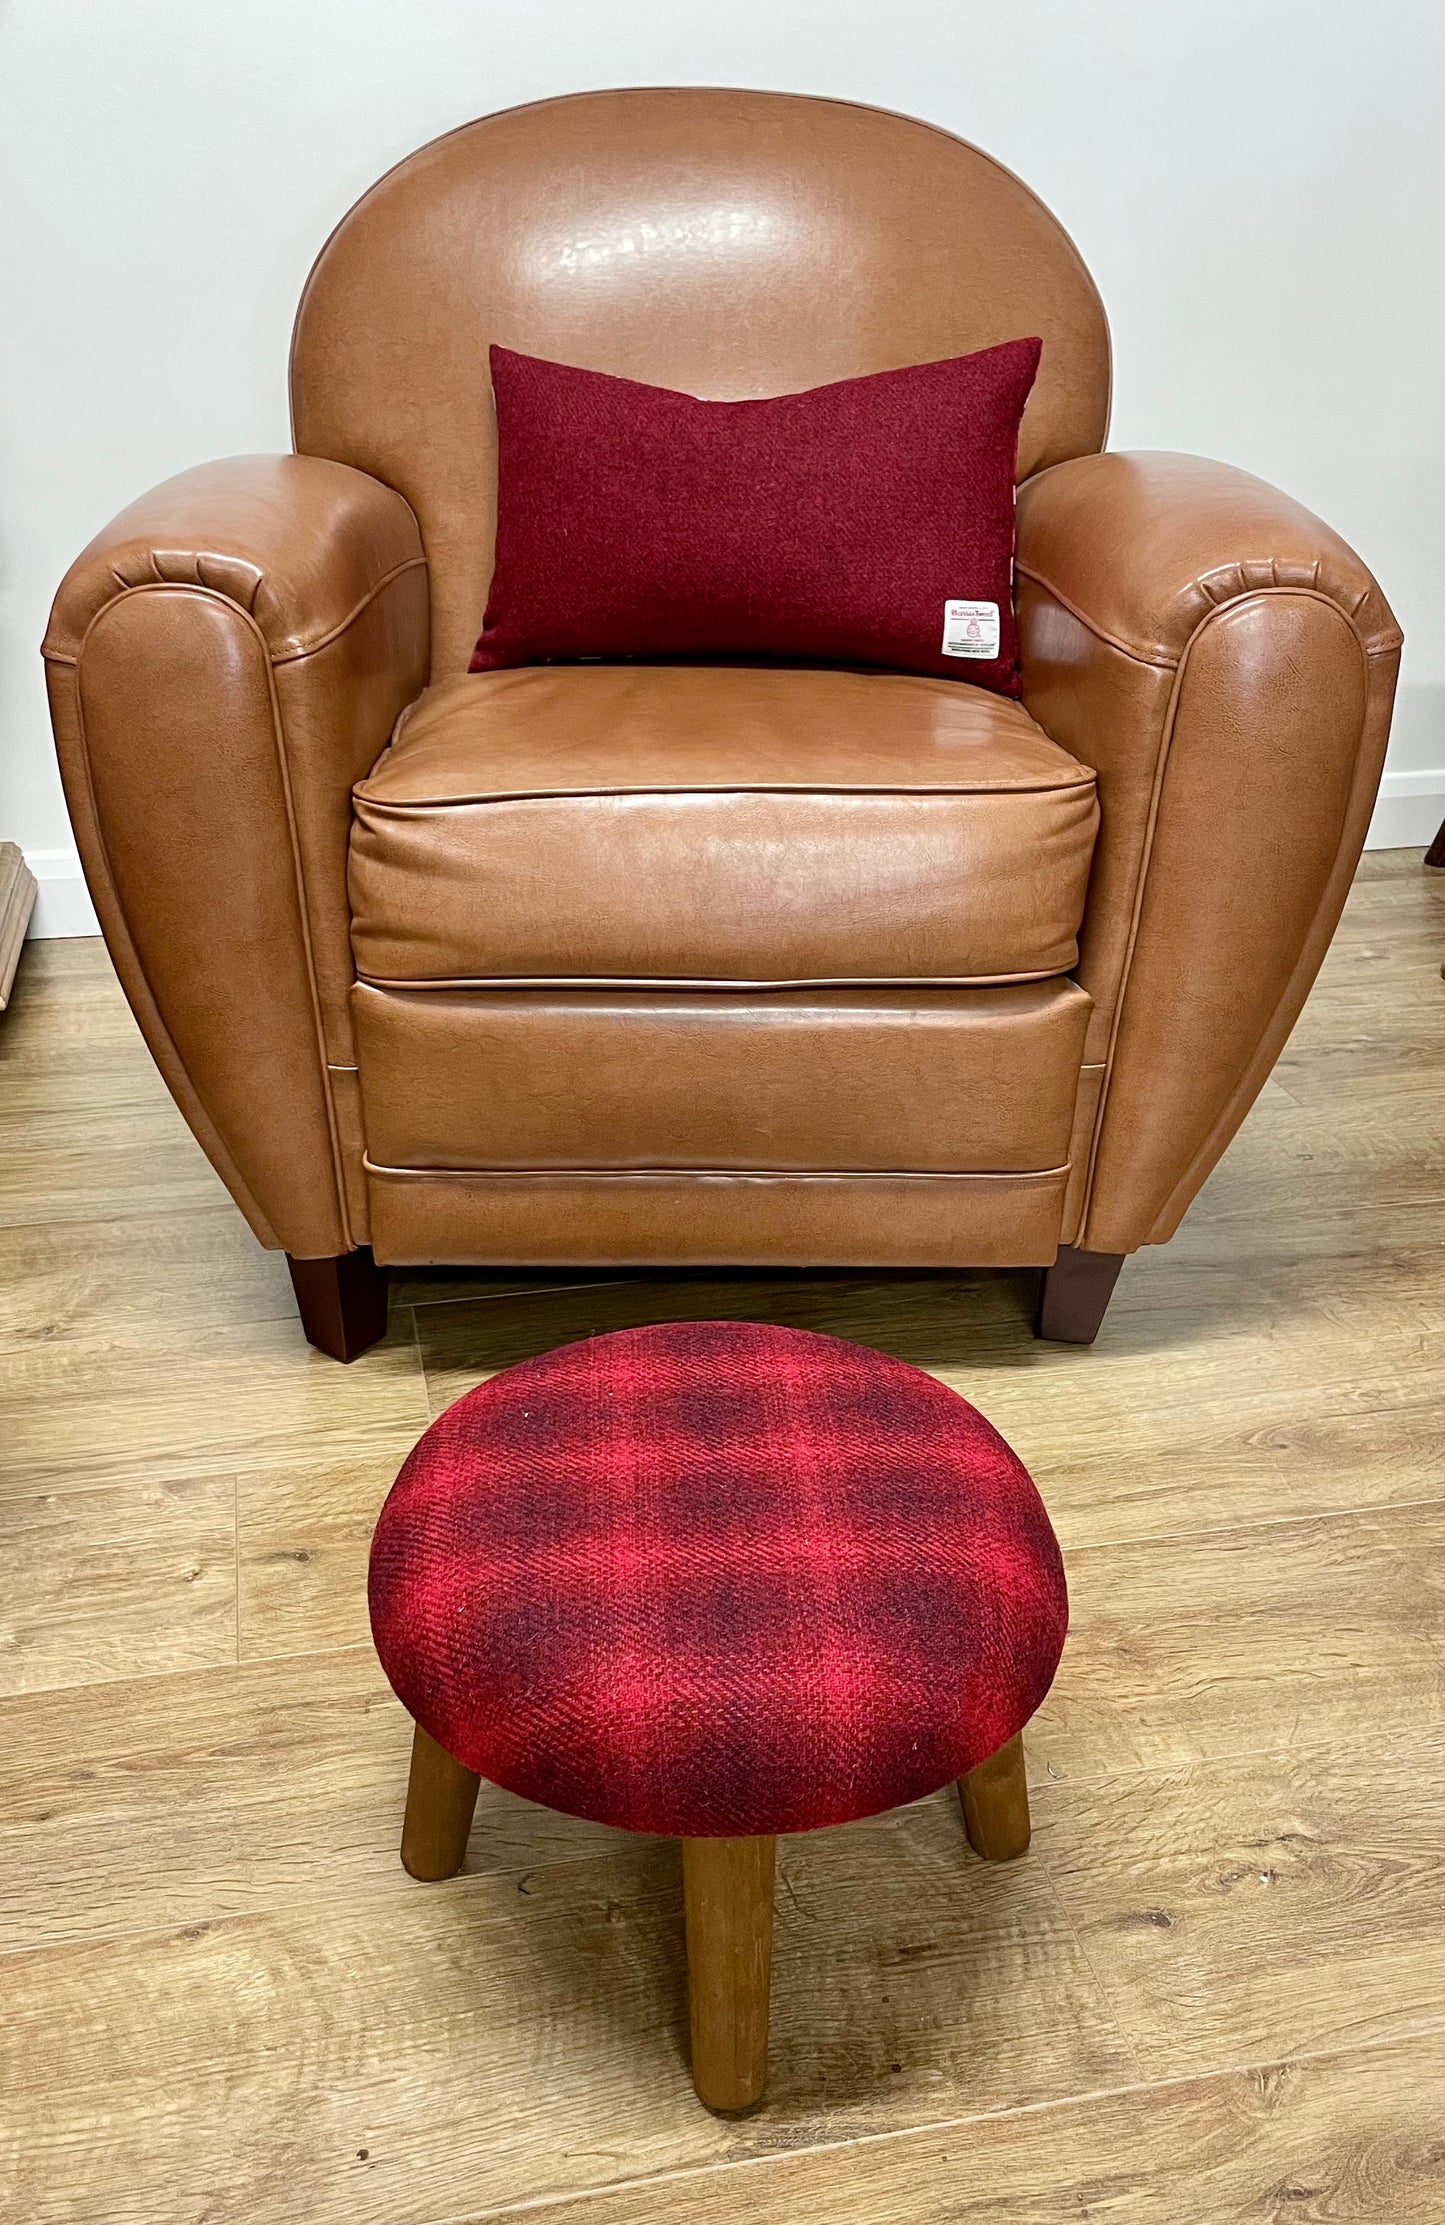 Red Harris Tweed Mini Button Footstool with Rustic Wooden Legs